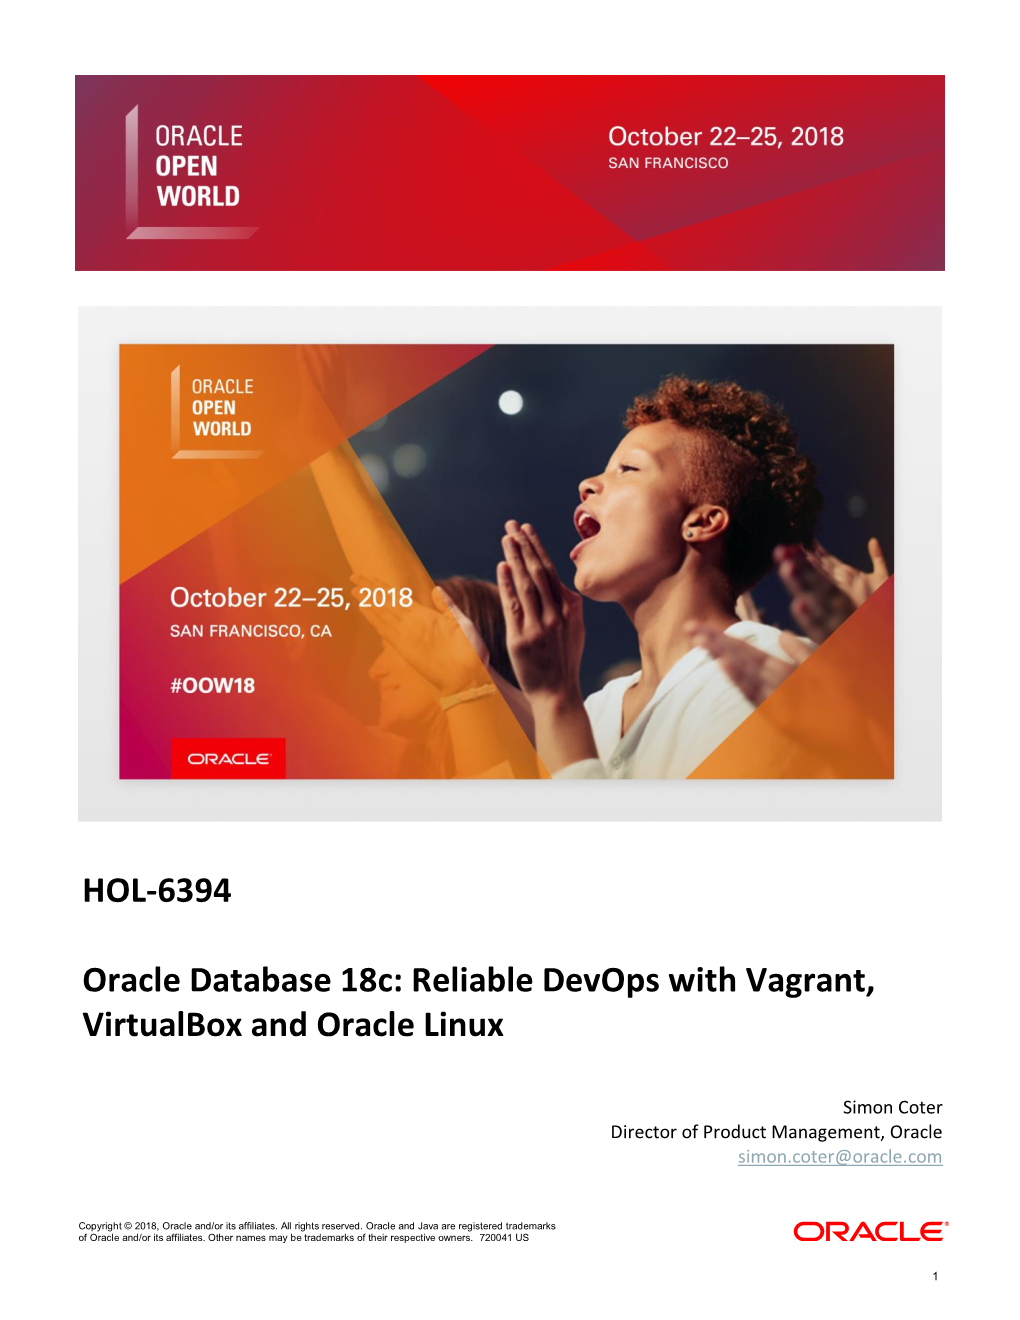 Reliable Devops with Vagrant, Virtualbox and Oracle Linux